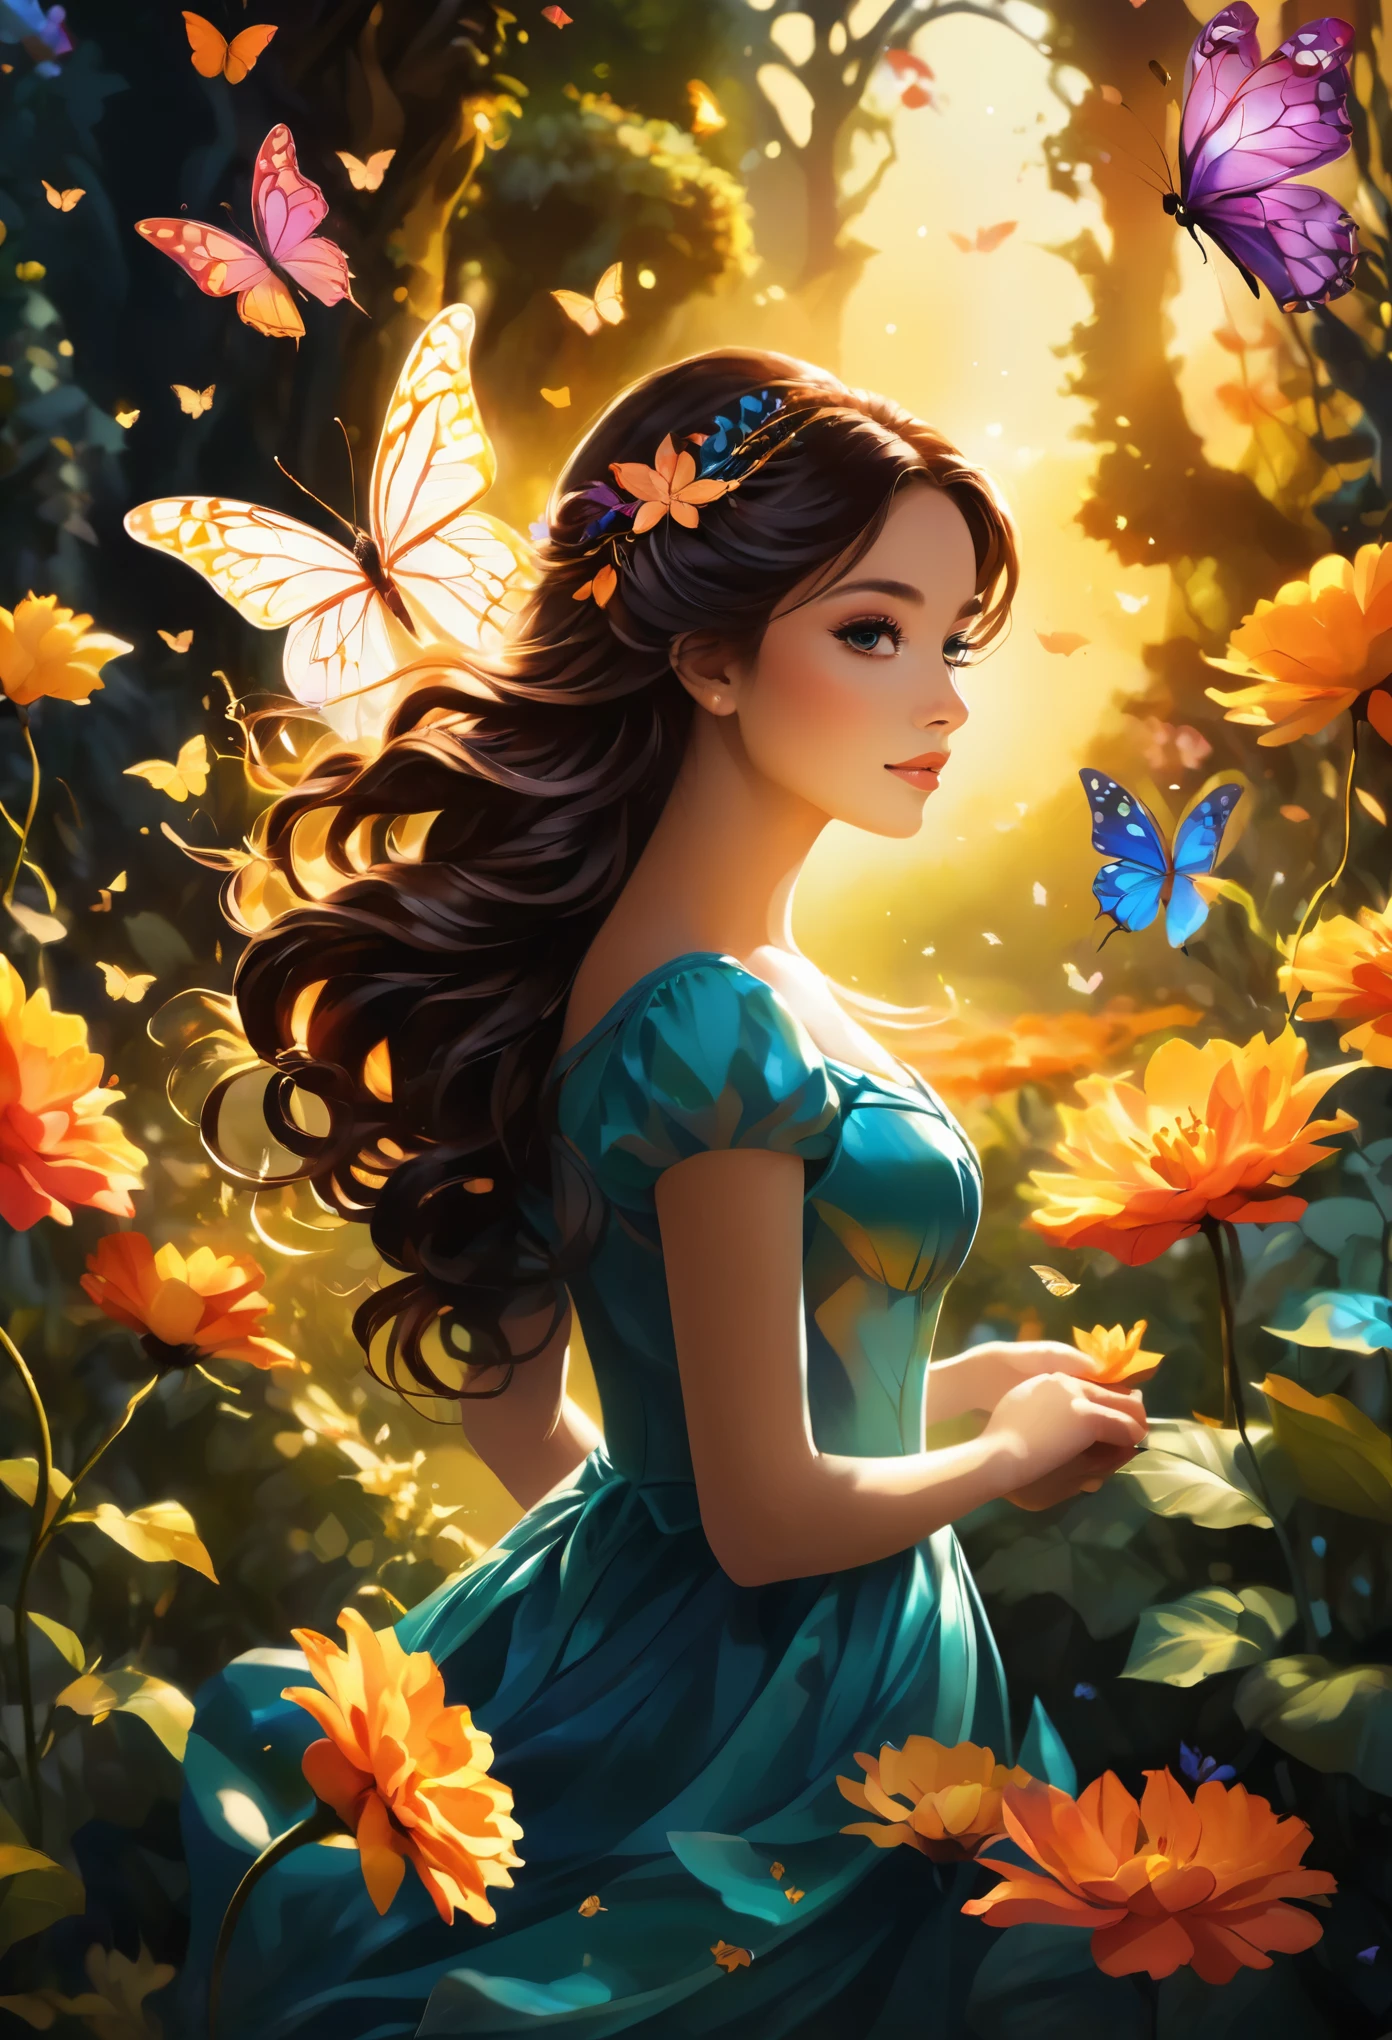 (Best Quality, 4k, 8k, high resolution, masterpiece: 1.2), (Beautiful queen butterfly:1.32) and ultra detailed, Long wings, vibrant and colorful, butterflies, Majestic patterns, real, regal, Elegant and detailed, delicate, ethereal, iridescent. , shimmering, Graced, charming, fluttering, floating, light, Mythical, Fancy, magical, enchantment, surreal, lozano, flourishing, vibrant garden, kissed by the sun, sunlit, Suave, dreamer, golden rays of light, bright flowers, radiant and bright, harmonious, peaceful, calm, sereno, fascinating, captivating.